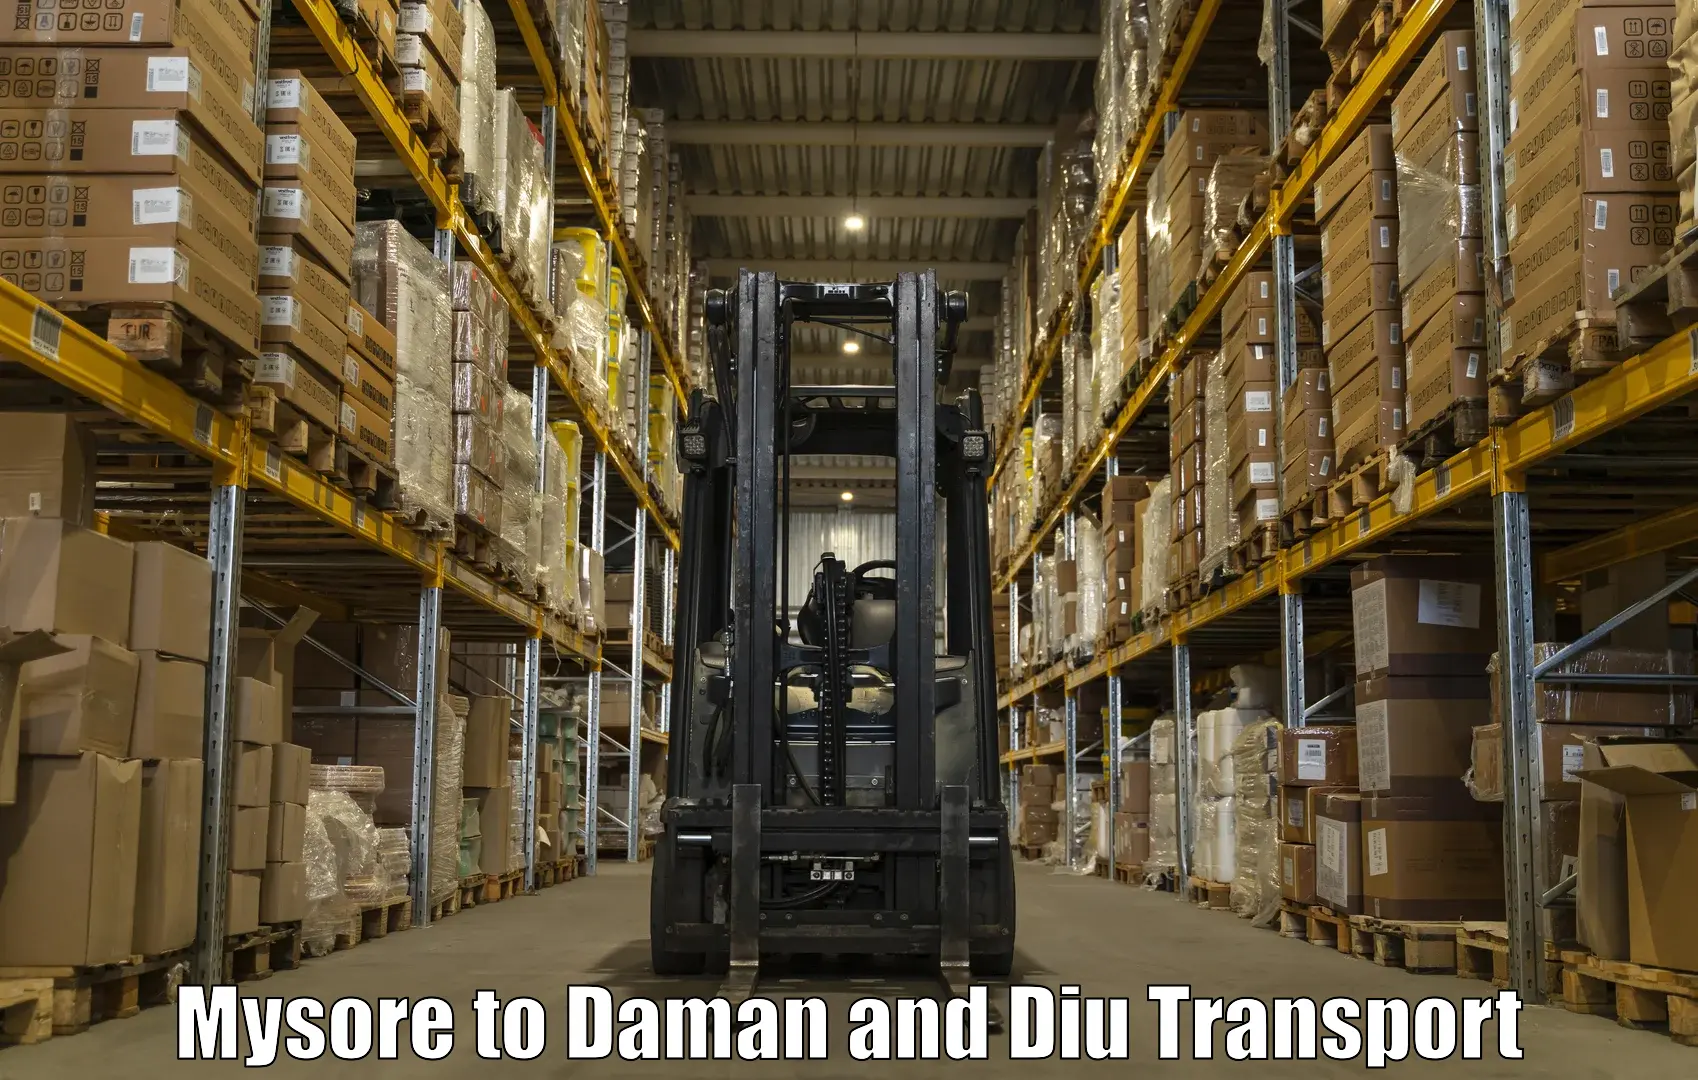 Truck transport companies in India Mysore to Daman and Diu